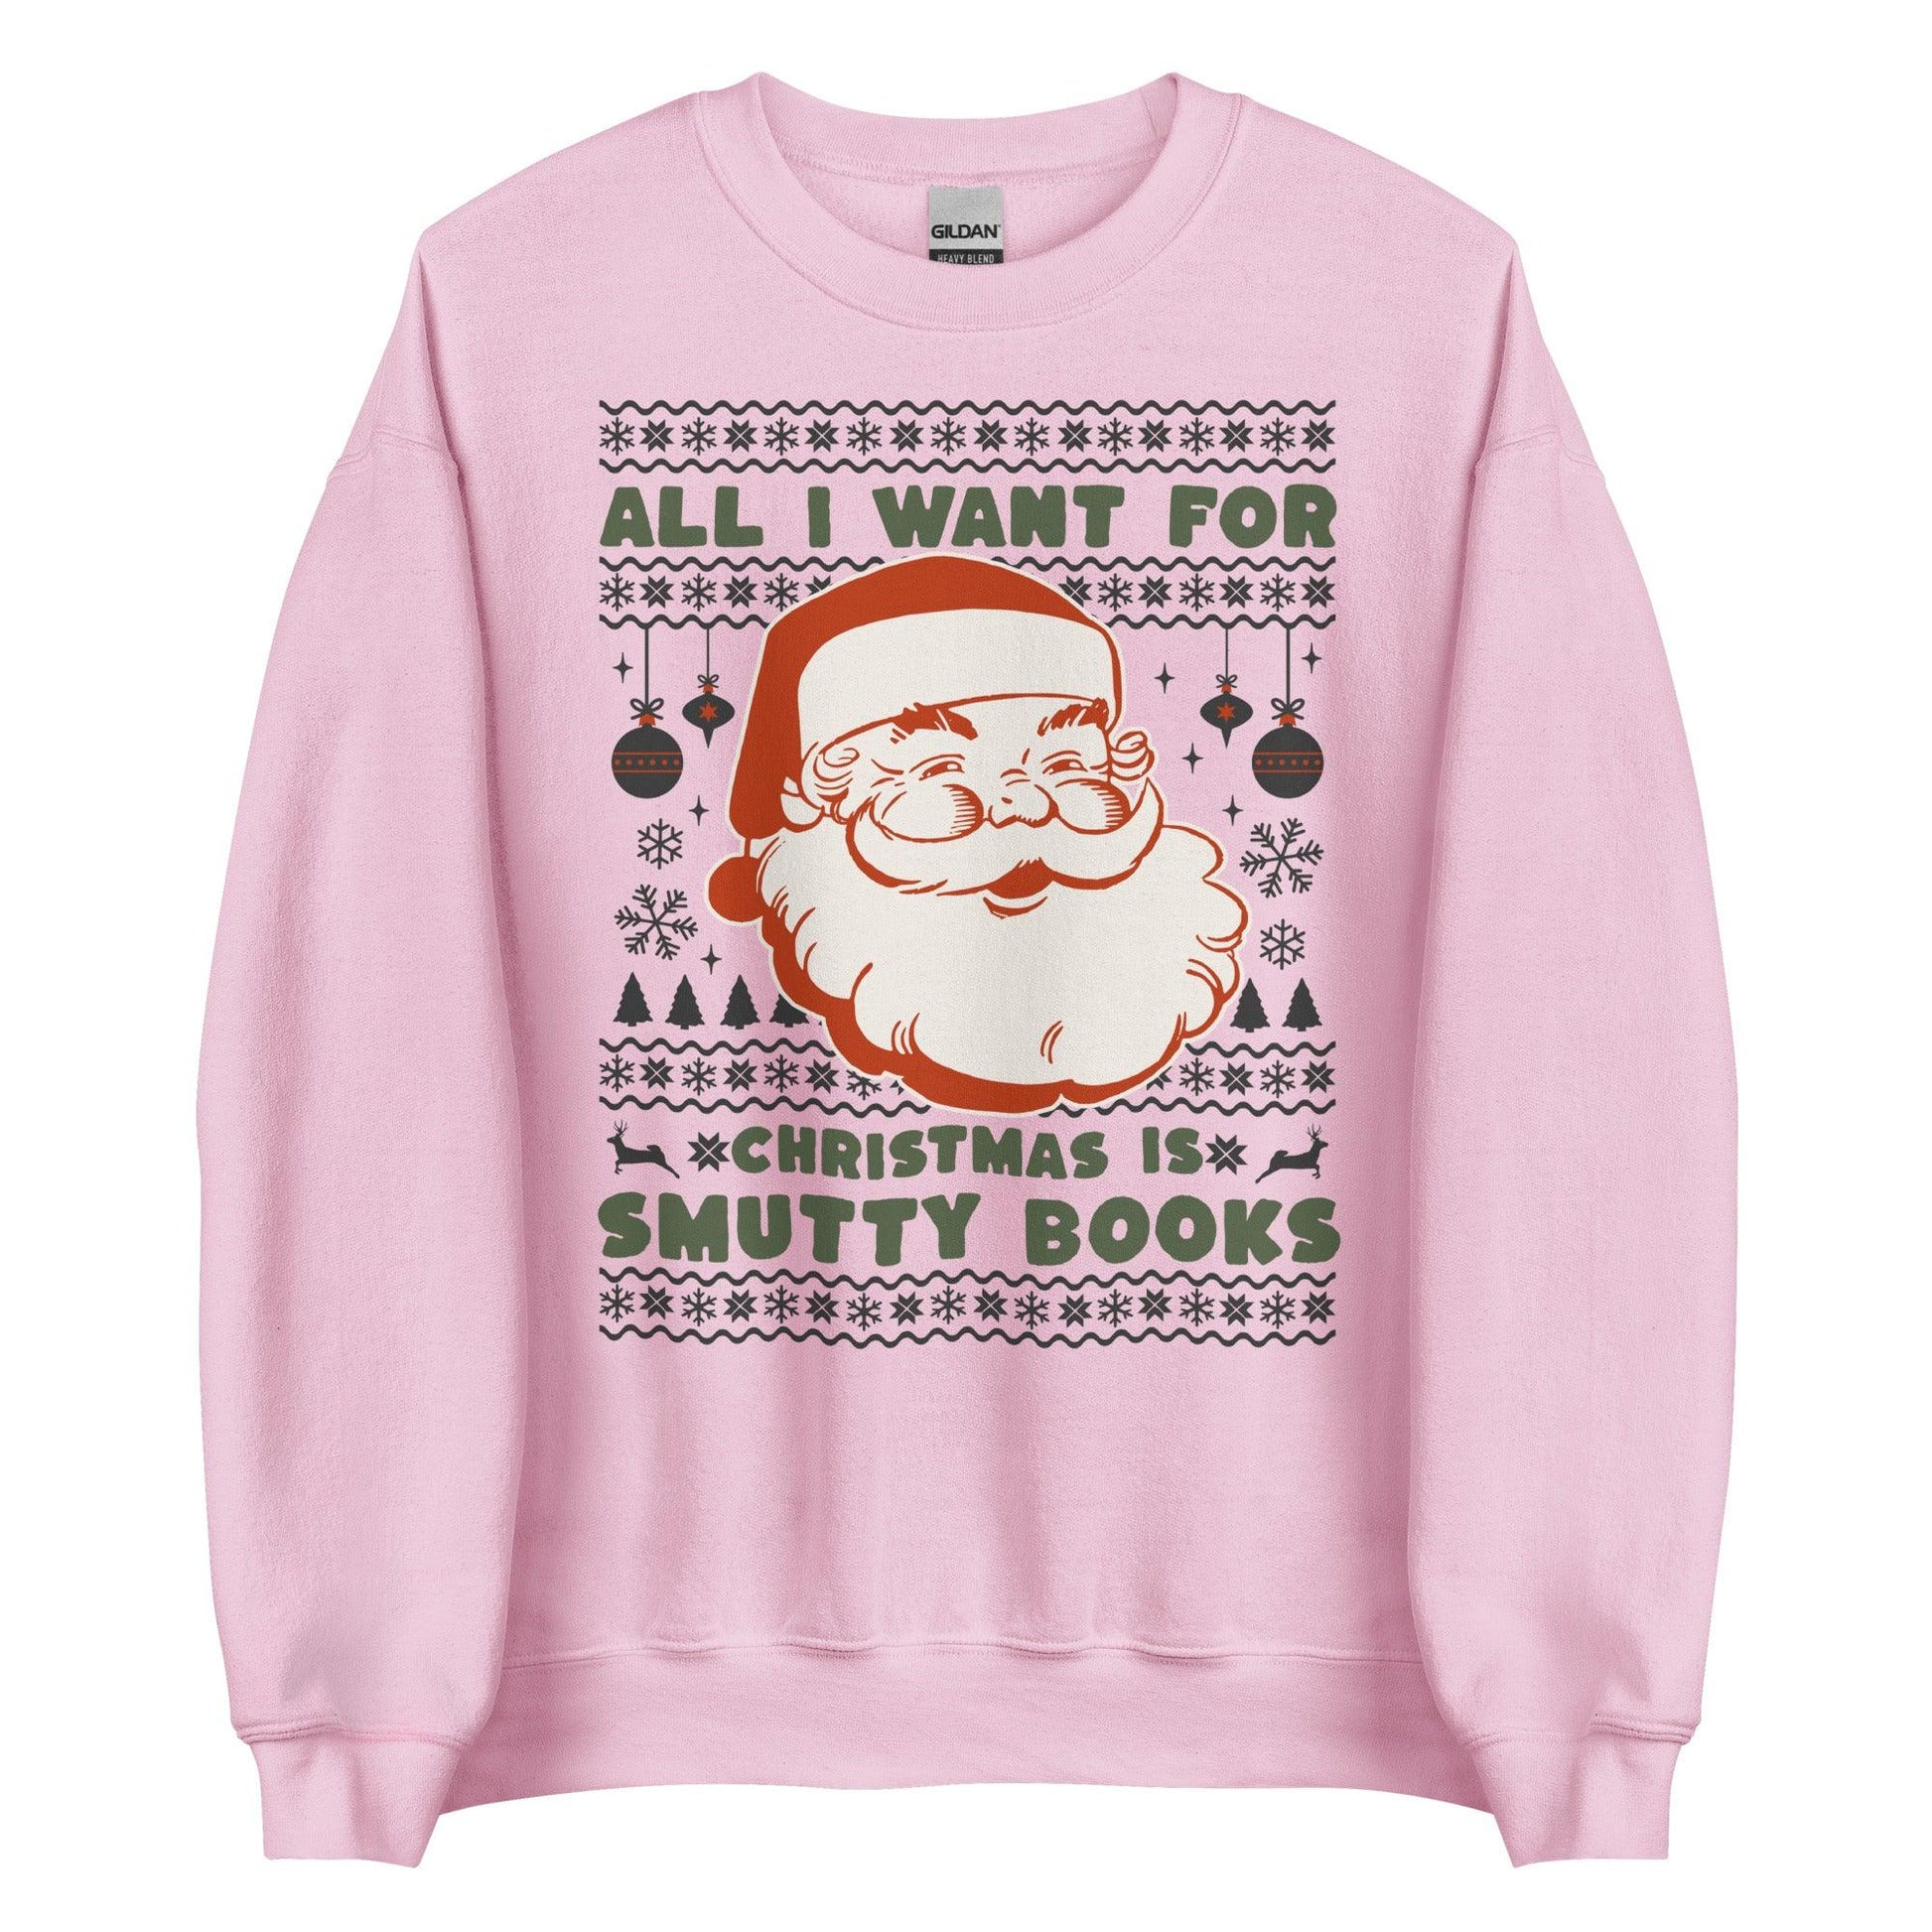 All I Want For Christmas Is Smutty Books Sweatshirt - The Bean Workshop - book lover, bookish, christmas, sweatshirt